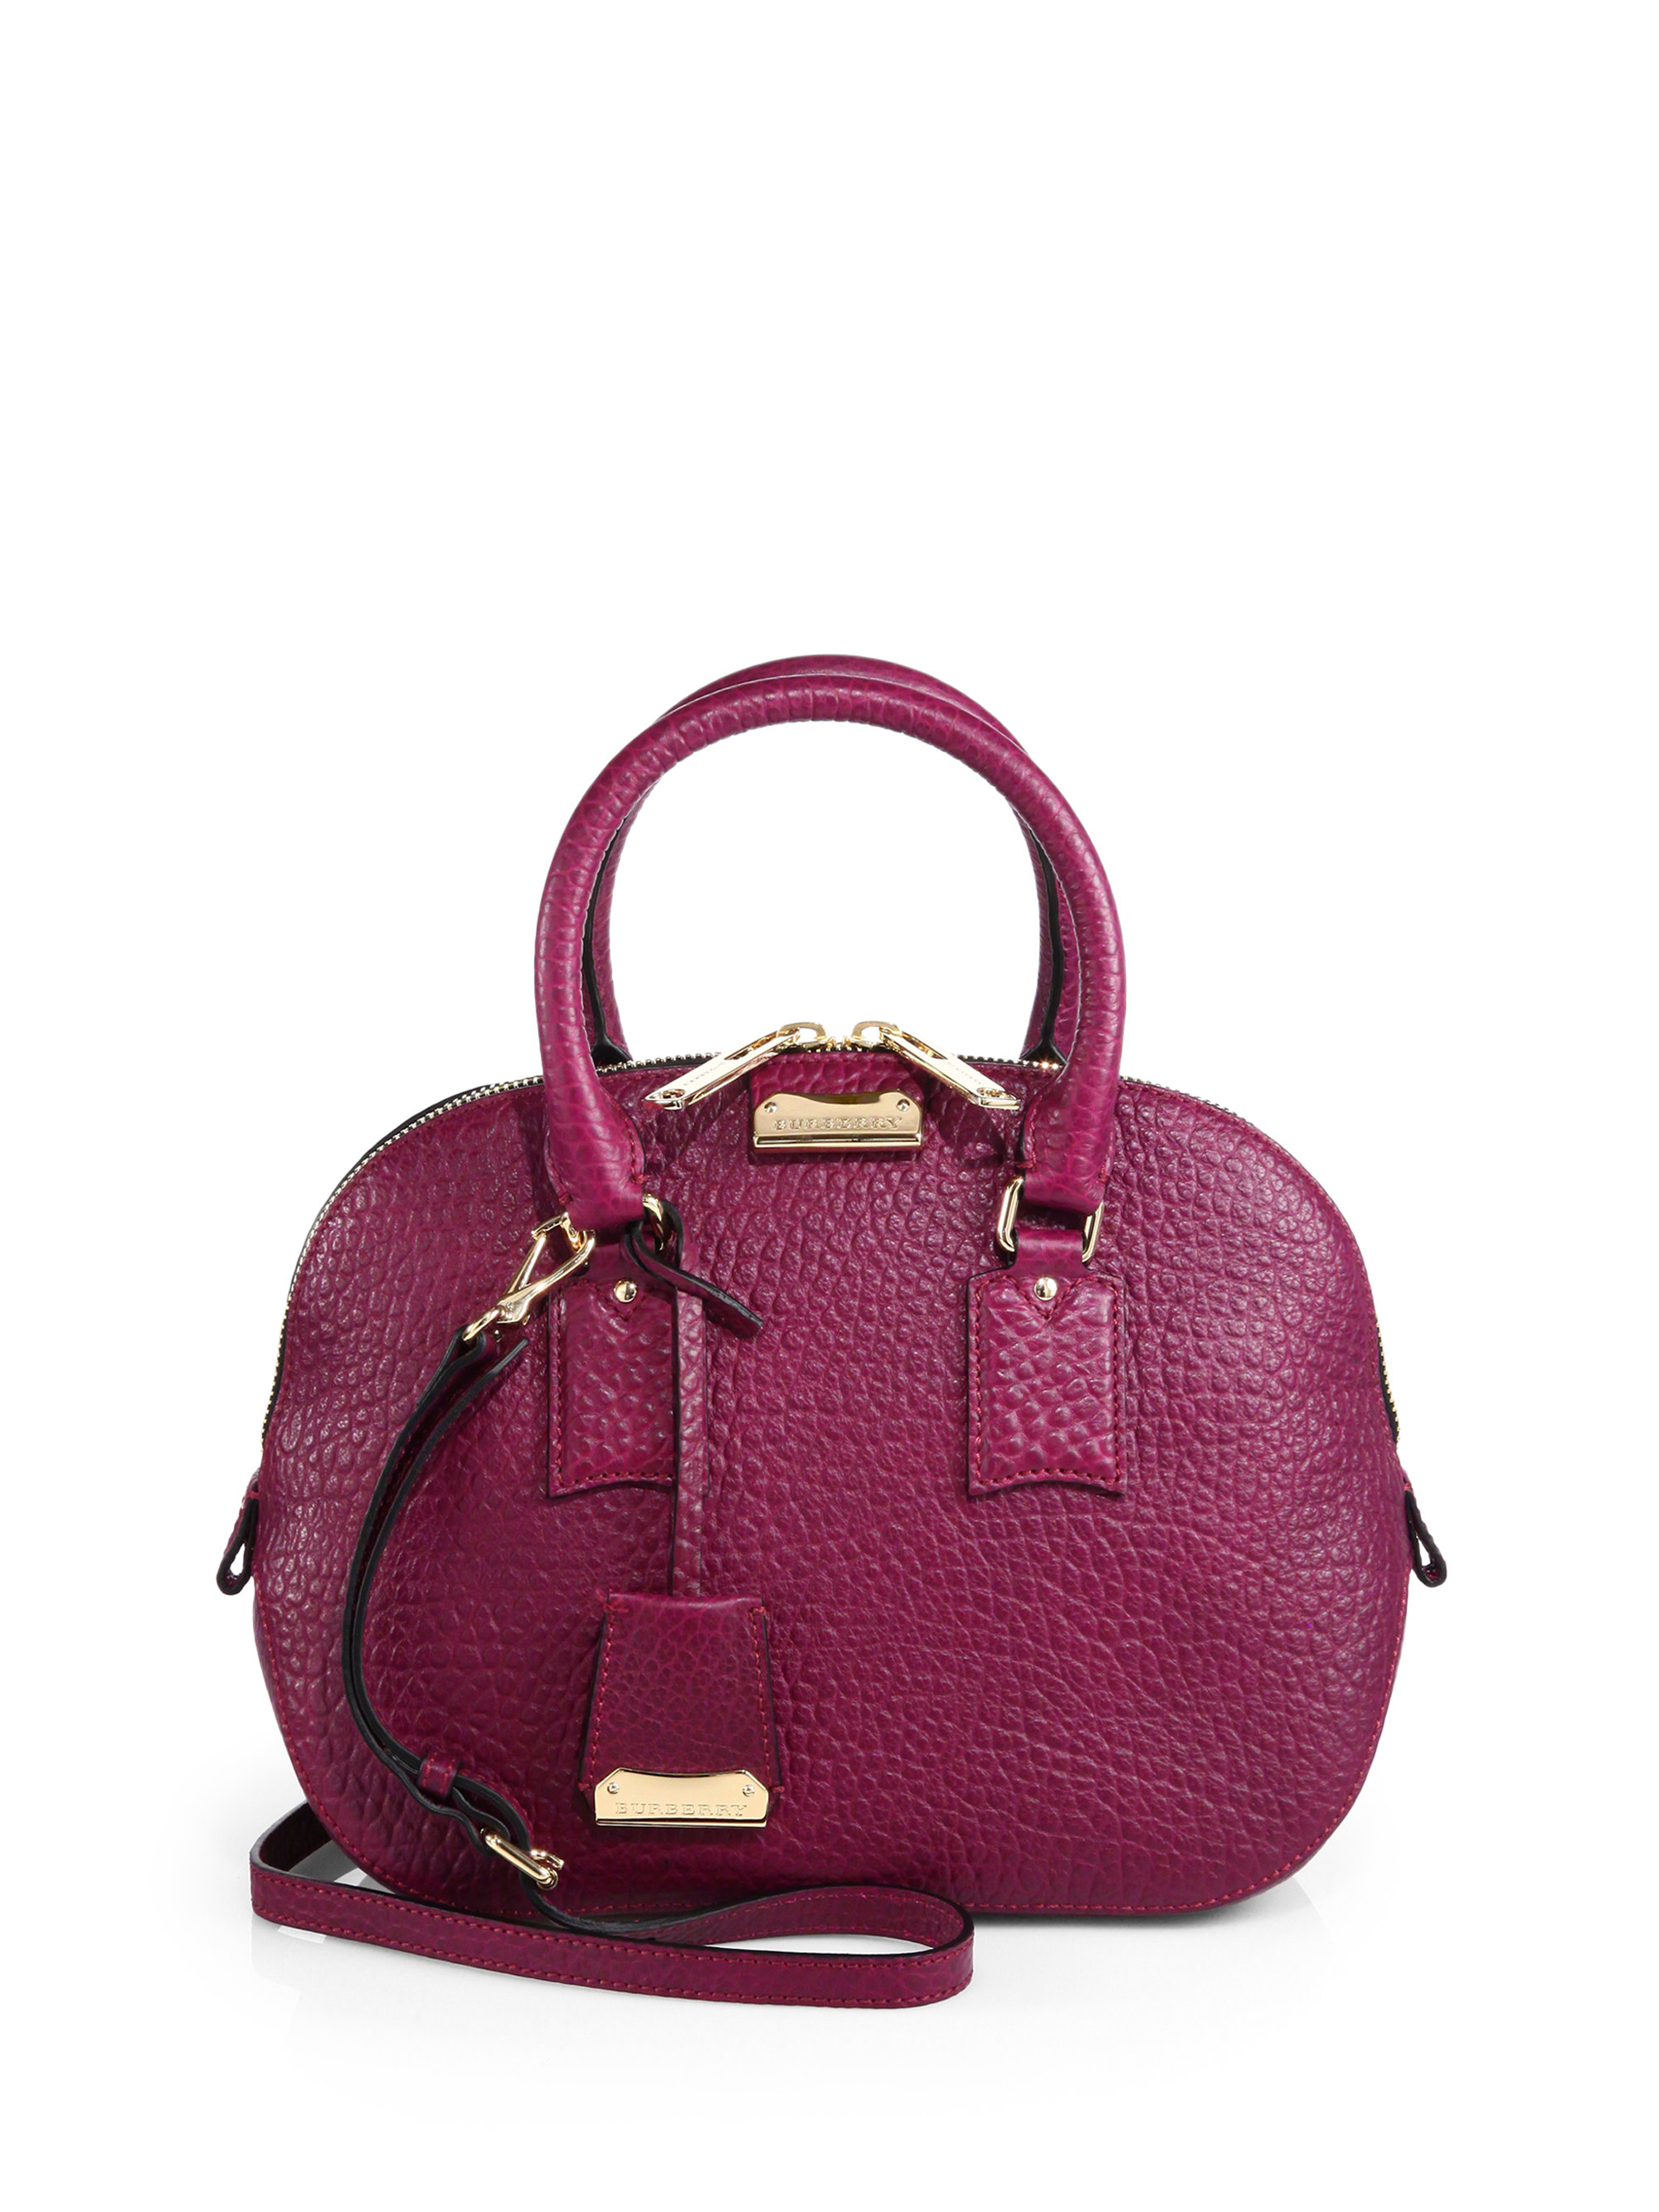 Burberry Orchard Satchel Tote Bag in Purple (MAGENTA) | Lyst